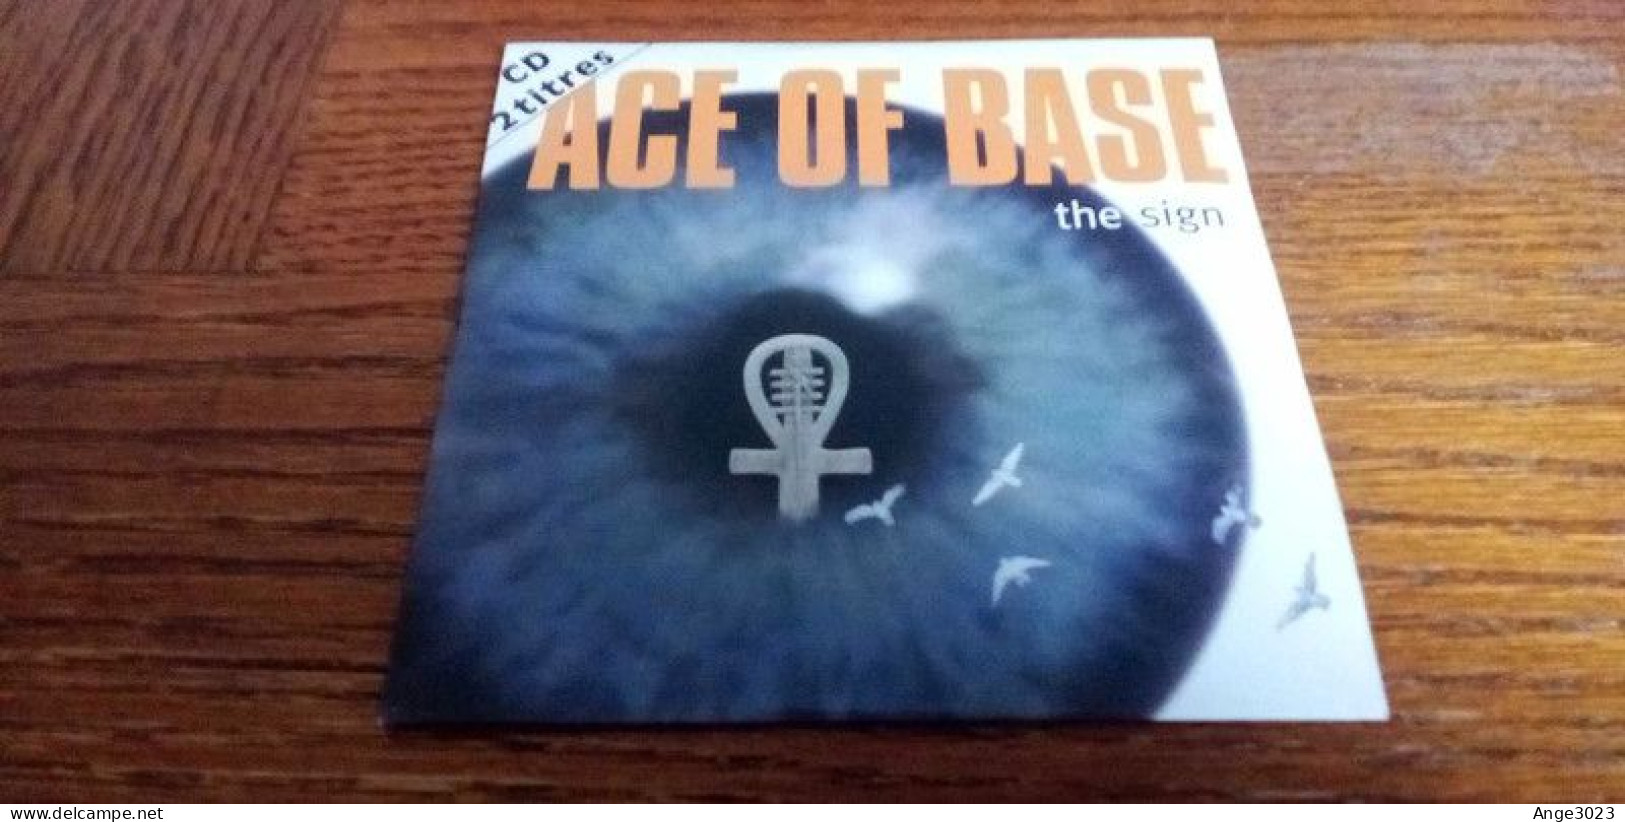 ACE OF BASE "The Sign" - Dance, Techno & House